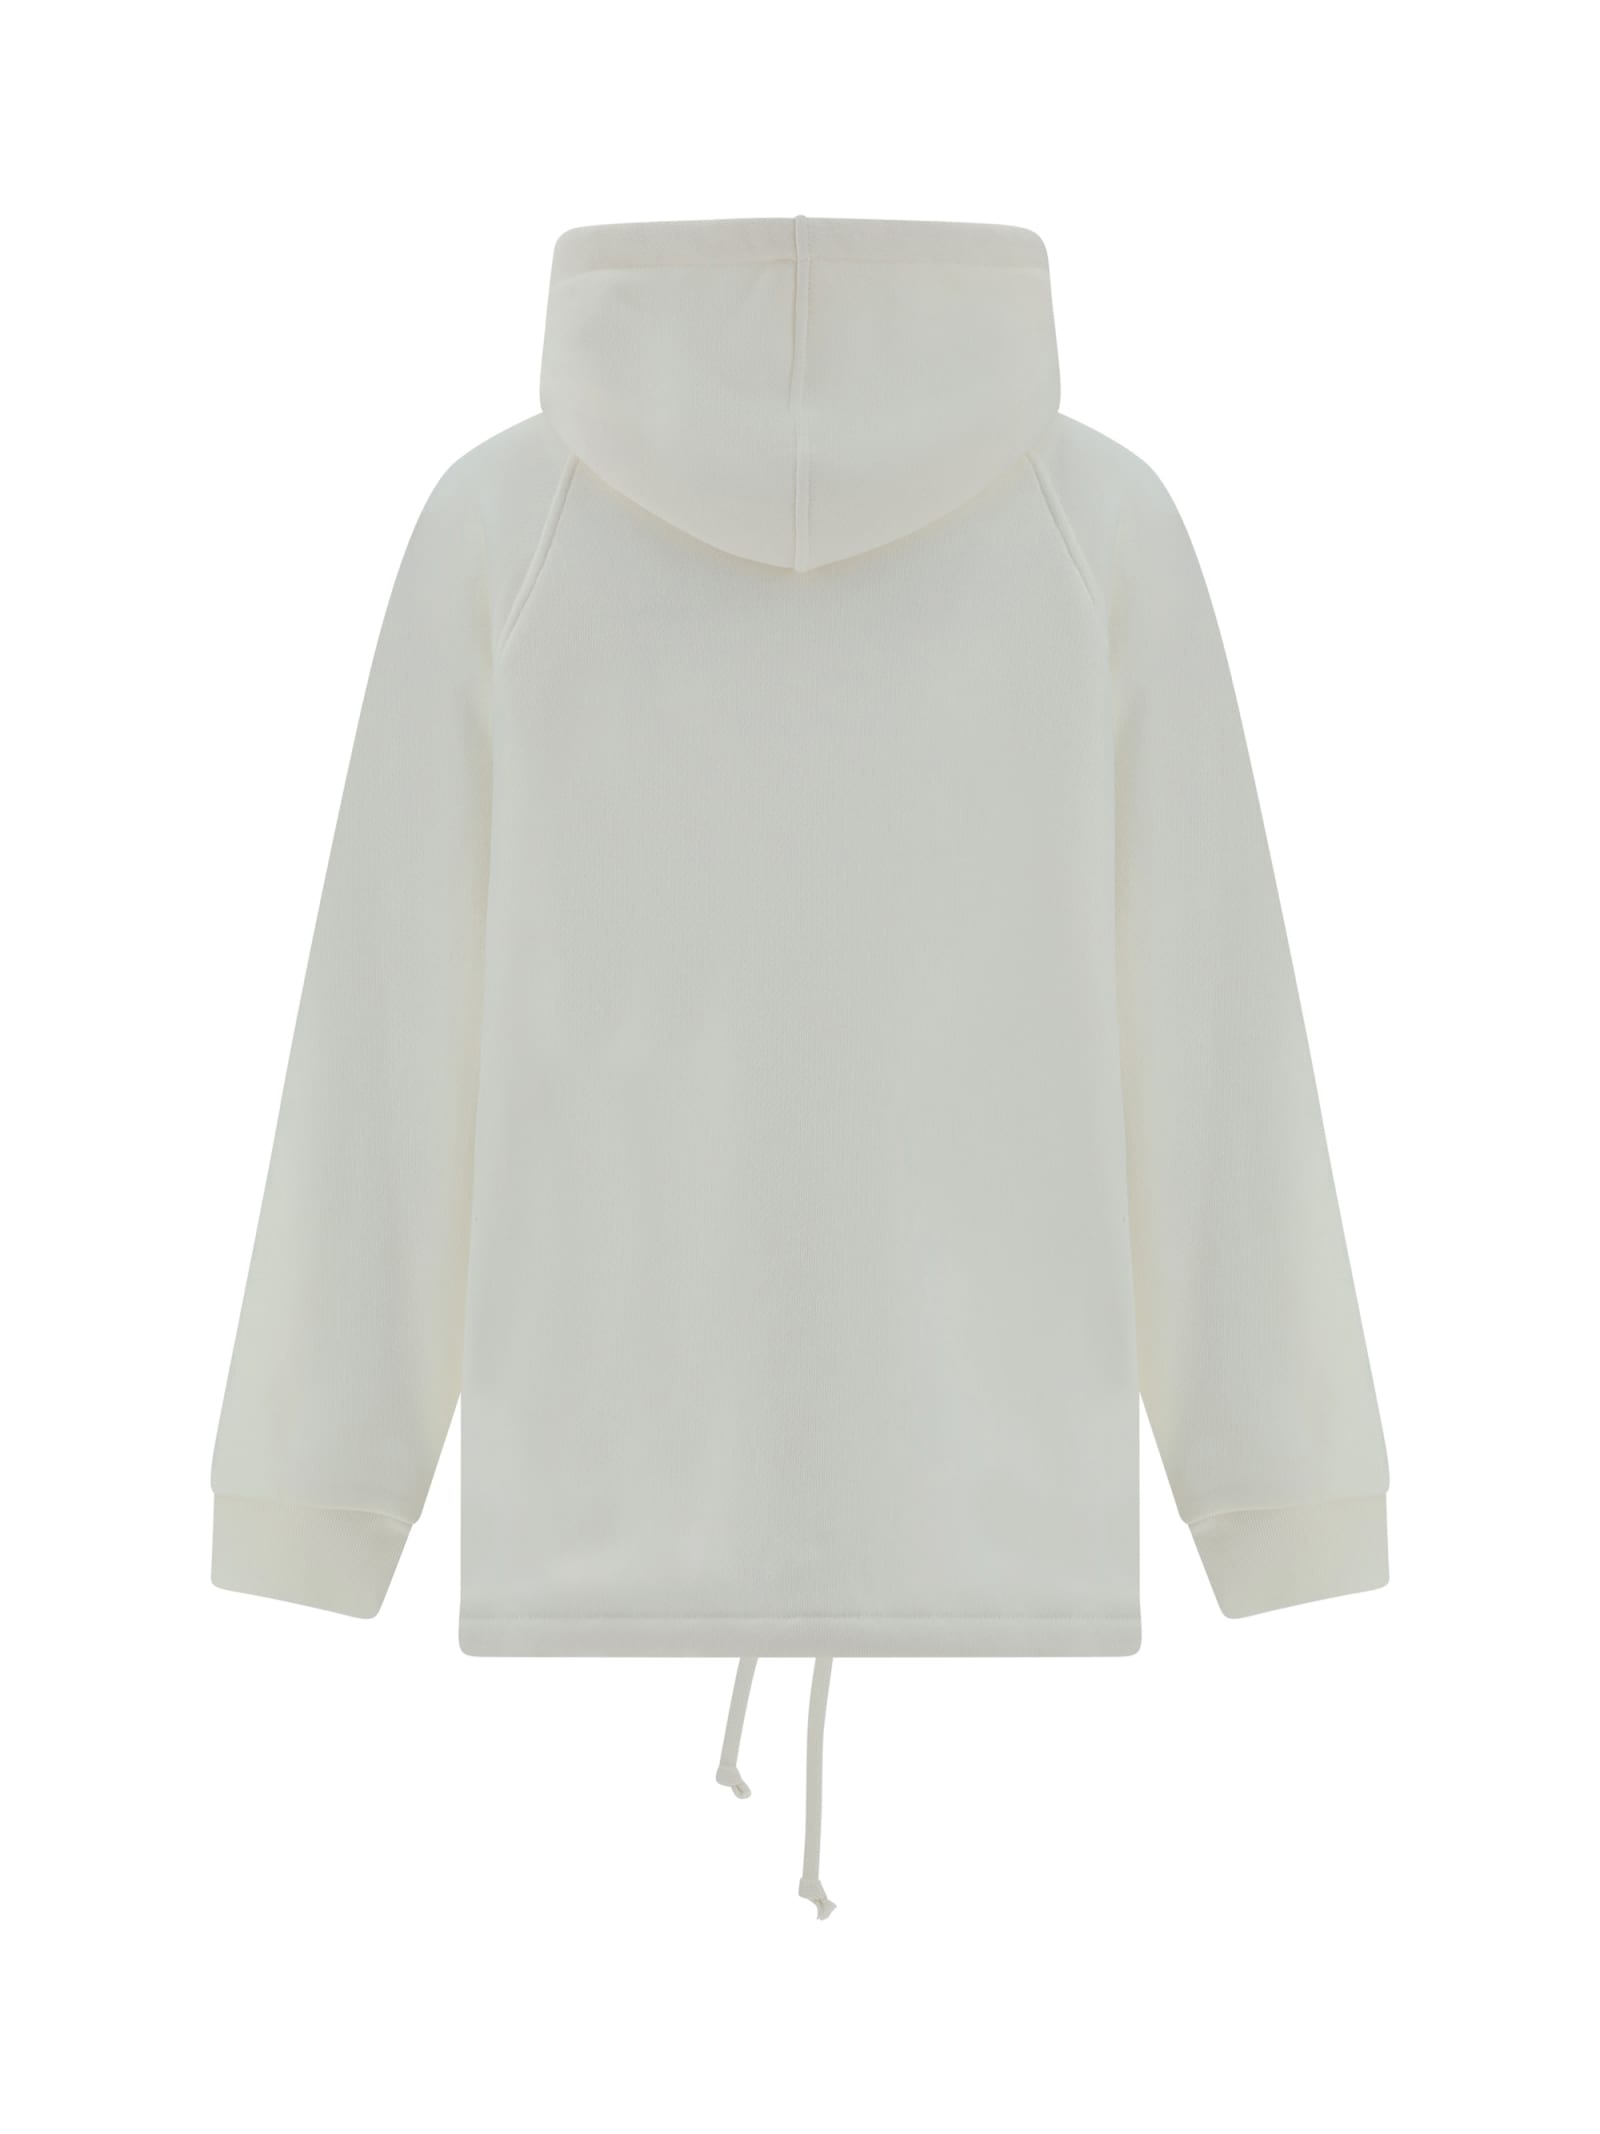 Shop Gucci Hoodie In White